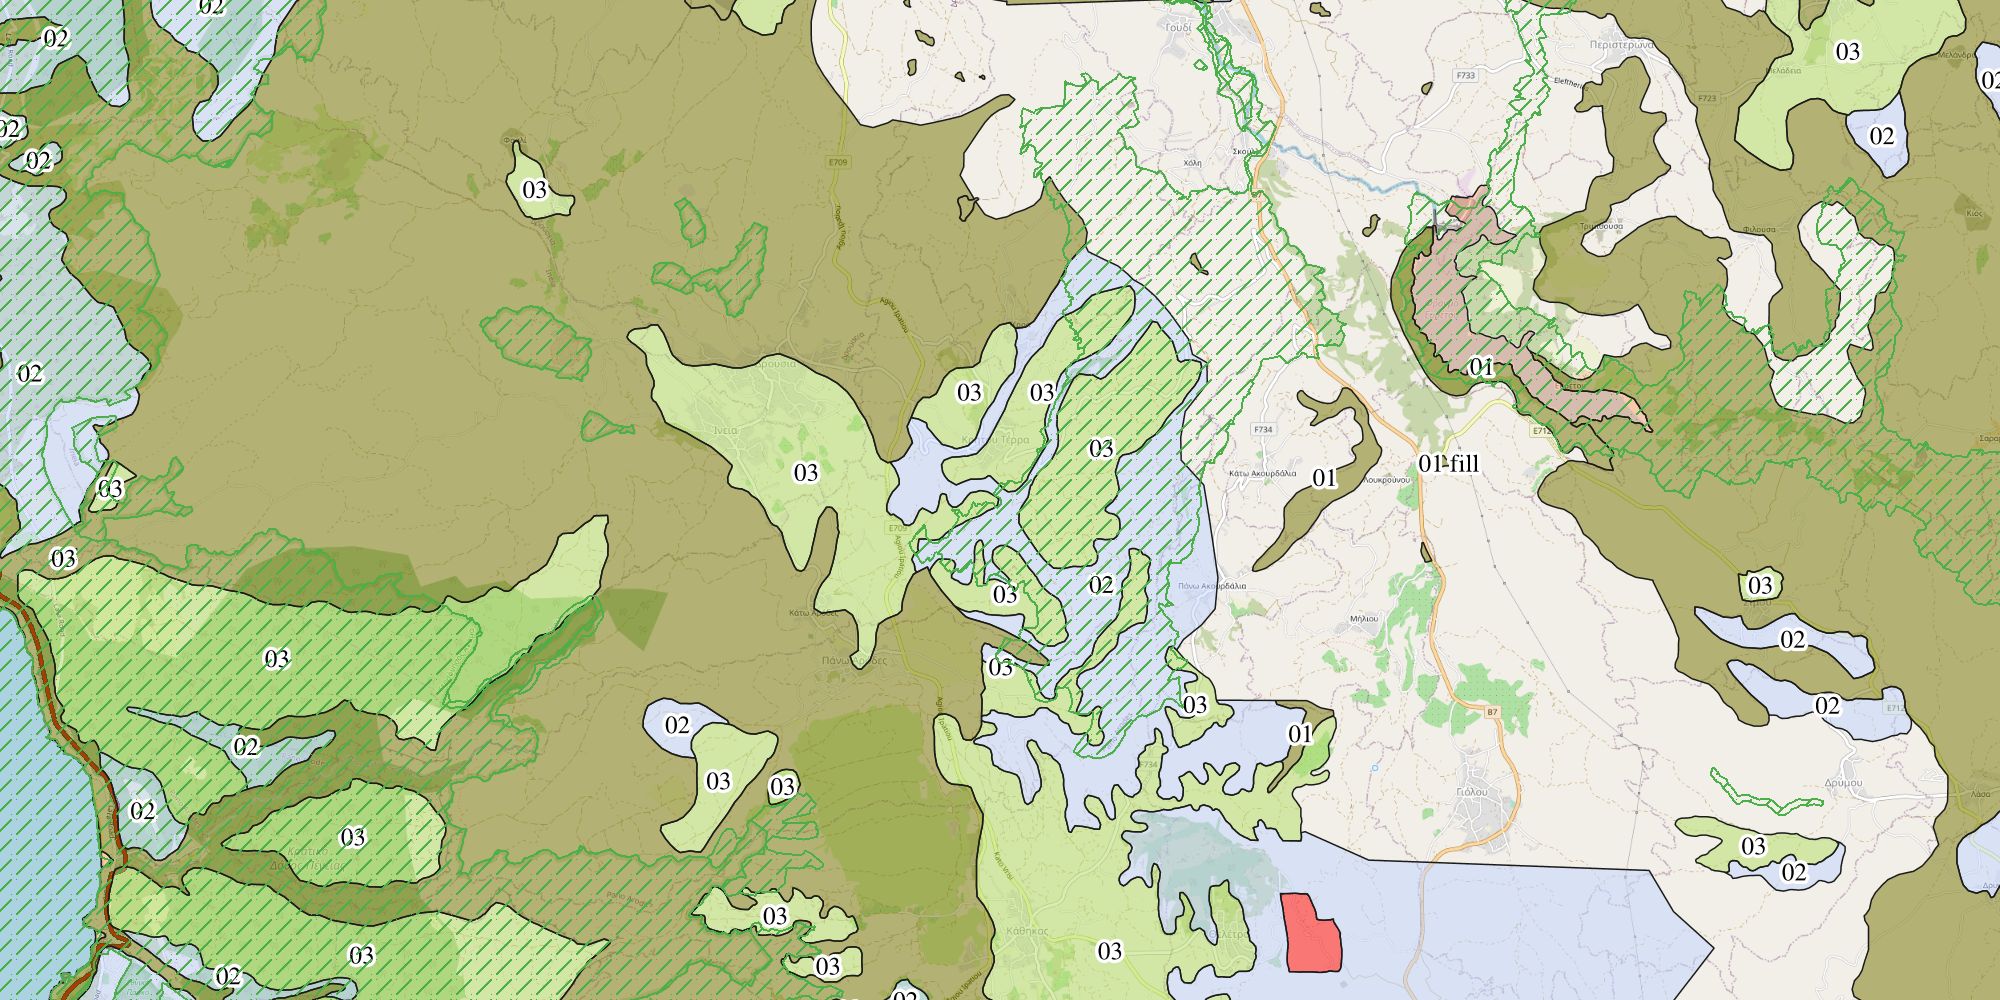 Gis Application Cyprus Geological Zones On A Map 57a2cf02393a42ce5326a7888619d02c 